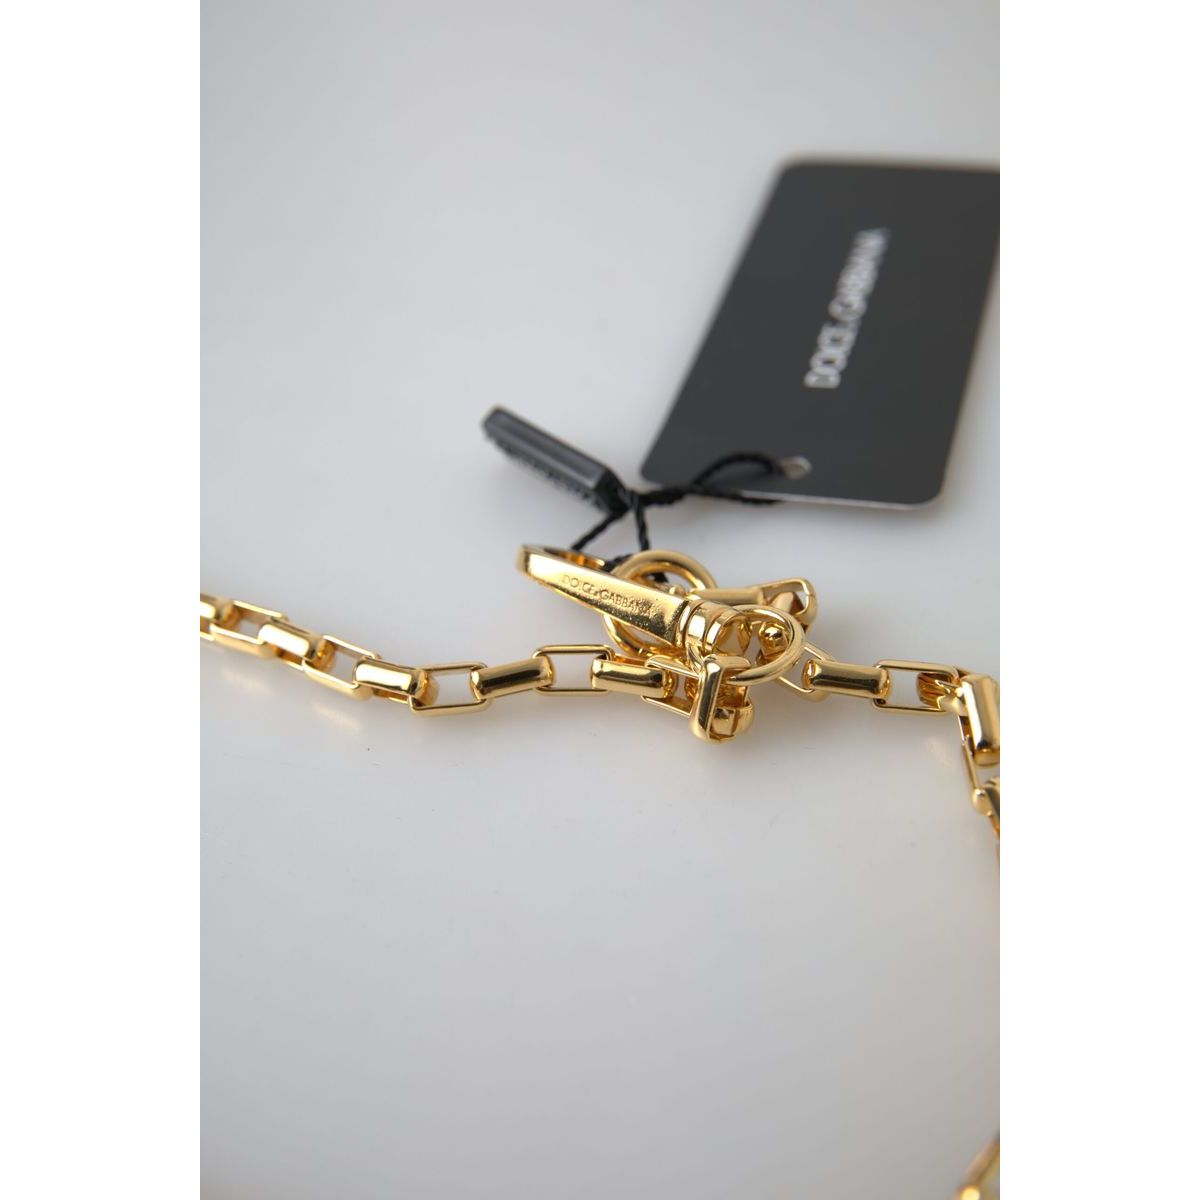 Dolce & Gabbana Chic Gold Charm Chain Necklace gold-tone-brass-chain-link-dg-logo-pendant-necklace 465A1293-scaled-1a450511-802_41ad777c-898d-4b97-8bd2-150fdb345e00.jpg